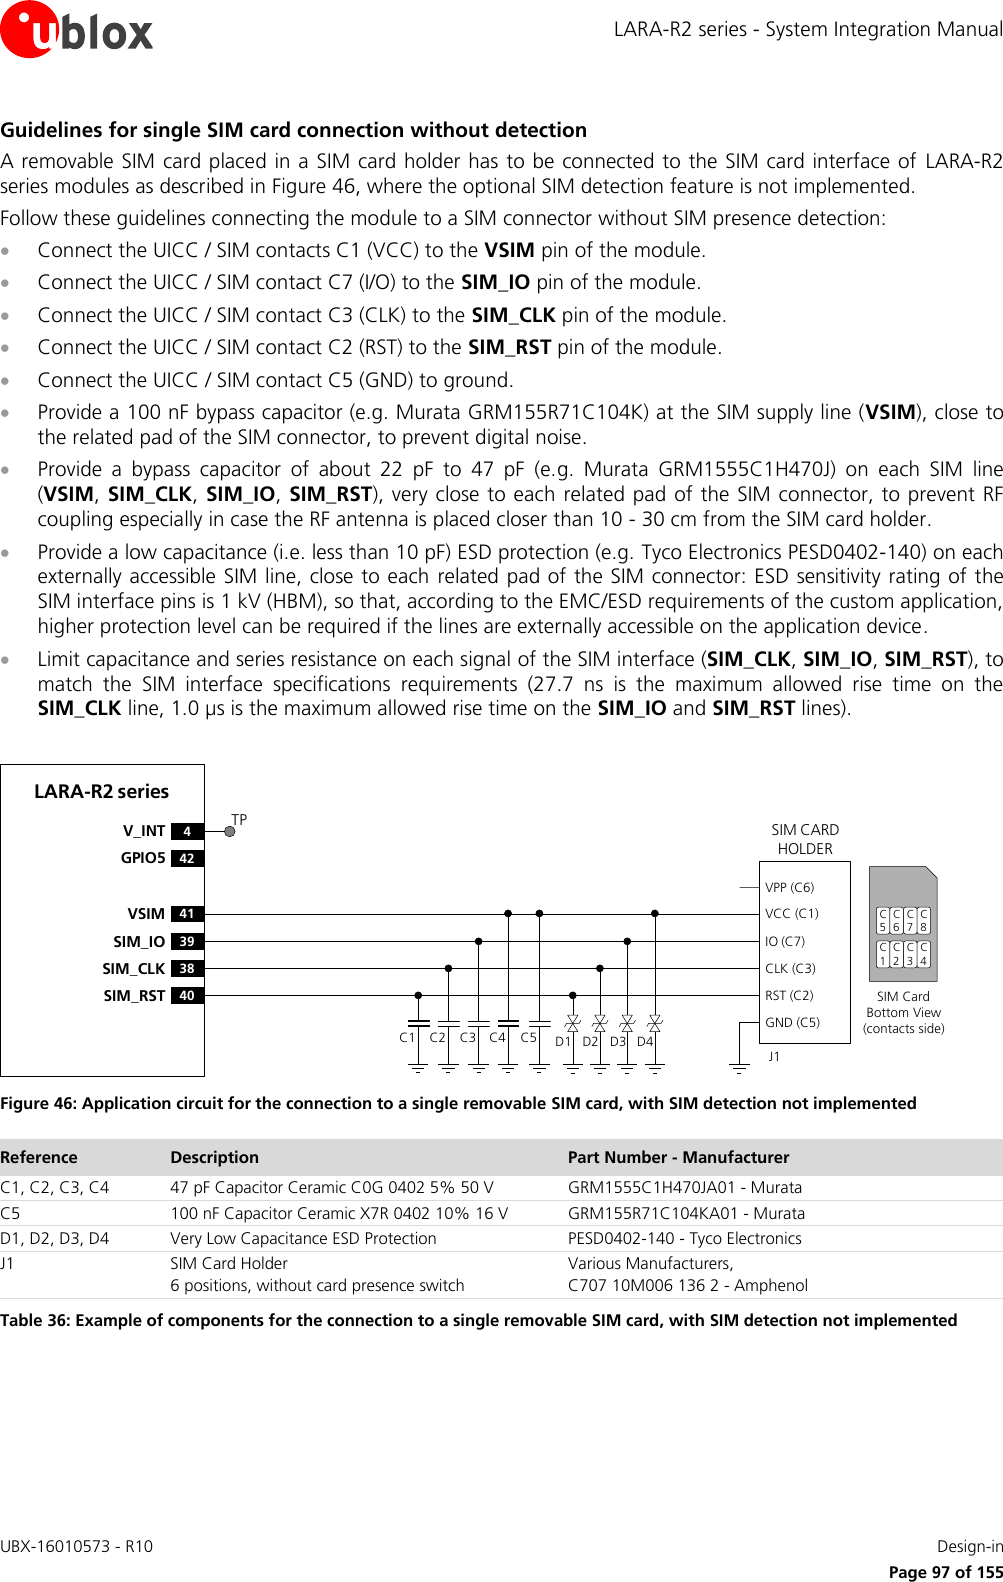 LARA-R2 series - System Integration Manual UBX-16010573 - R10    Design-in     Page 97 of 155 Guidelines for single SIM card connection without detection A removable SIM card placed in a SIM card holder has to be connected to the SIM card interface of  LARA-R2 series modules as described in Figure 46, where the optional SIM detection feature is not implemented. Follow these guidelines connecting the module to a SIM connector without SIM presence detection:  Connect the UICC / SIM contacts C1 (VCC) to the VSIM pin of the module.  Connect the UICC / SIM contact C7 (I/O) to the SIM_IO pin of the module.  Connect the UICC / SIM contact C3 (CLK) to the SIM_CLK pin of the module.  Connect the UICC / SIM contact C2 (RST) to the SIM_RST pin of the module.  Connect the UICC / SIM contact C5 (GND) to ground.  Provide a 100 nF bypass capacitor (e.g. Murata GRM155R71C104K) at the SIM supply line (VSIM), close to the related pad of the SIM connector, to prevent digital noise.  Provide  a  bypass  capacitor  of  about  22  pF  to  47  pF  (e.g.  Murata  GRM1555C1H470J)  on  each  SIM  line (VSIM, SIM_CLK,  SIM_IO, SIM_RST), very close to each related pad of the SIM connector, to prevent RF coupling especially in case the RF antenna is placed closer than 10 - 30 cm from the SIM card holder.  Provide a low capacitance (i.e. less than 10 pF) ESD protection (e.g. Tyco Electronics PESD0402-140) on each externally accessible SIM line, close to each  related pad of the SIM connector: ESD sensitivity rating of the SIM interface pins is 1 kV (HBM), so that, according to the EMC/ESD requirements of the custom application, higher protection level can be required if the lines are externally accessible on the application device.  Limit capacitance and series resistance on each signal of the SIM interface (SIM_CLK, SIM_IO, SIM_RST), to match  the  SIM  interface  specifications  requirements  (27.7  ns  is  the  maximum  allowed  rise  time  on  the SIM_CLK line, 1.0 µs is the maximum allowed rise time on the SIM_IO and SIM_RST lines).  LARA-R2 series41VSIM39SIM_IO38SIM_CLK40SIM_RST4V_INT42GPIO5SIM CARD HOLDERC5C6C7C1C2C3SIM Card Bottom View (contacts side)C1VPP (C6)VCC (C1)IO (C7)CLK (C3)RST (C2)GND (C5)C2 C3 C5J1C4 D1 D2 D3 D4C8C4TP Figure 46: Application circuit for the connection to a single removable SIM card, with SIM detection not implemented Reference Description Part Number - Manufacturer C1, C2, C3, C4 47 pF Capacitor Ceramic C0G 0402 5% 50 V GRM1555C1H470JA01 - Murata C5 100 nF Capacitor Ceramic X7R 0402 10% 16 V GRM155R71C104KA01 - Murata D1, D2, D3, D4 Very Low Capacitance ESD Protection PESD0402-140 - Tyco Electronics  J1 SIM Card Holder 6 positions, without card presence switch Various Manufacturers, C707 10M006 136 2 - Amphenol Table 36: Example of components for the connection to a single removable SIM card, with SIM detection not implemented  